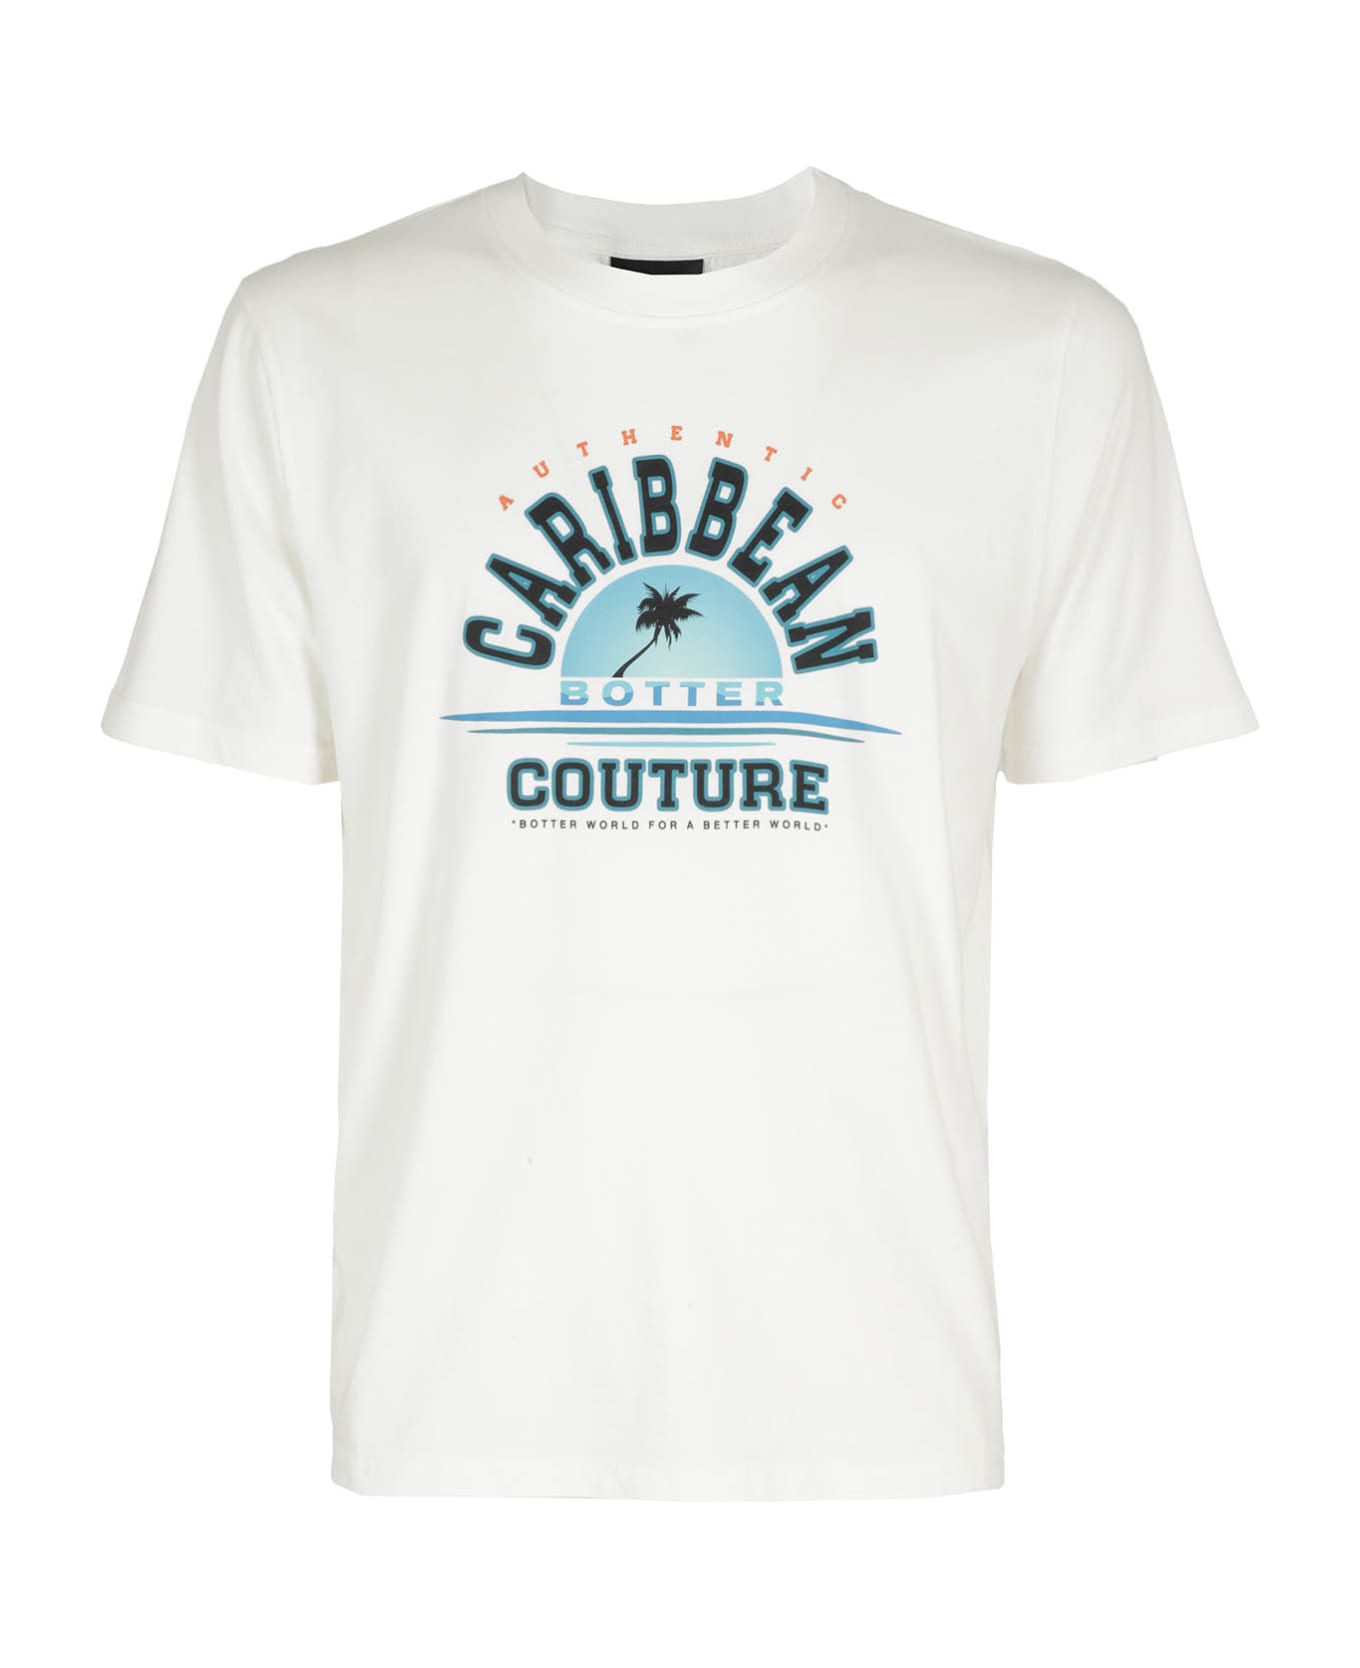 Botter Classic Caribbean Couture - White College